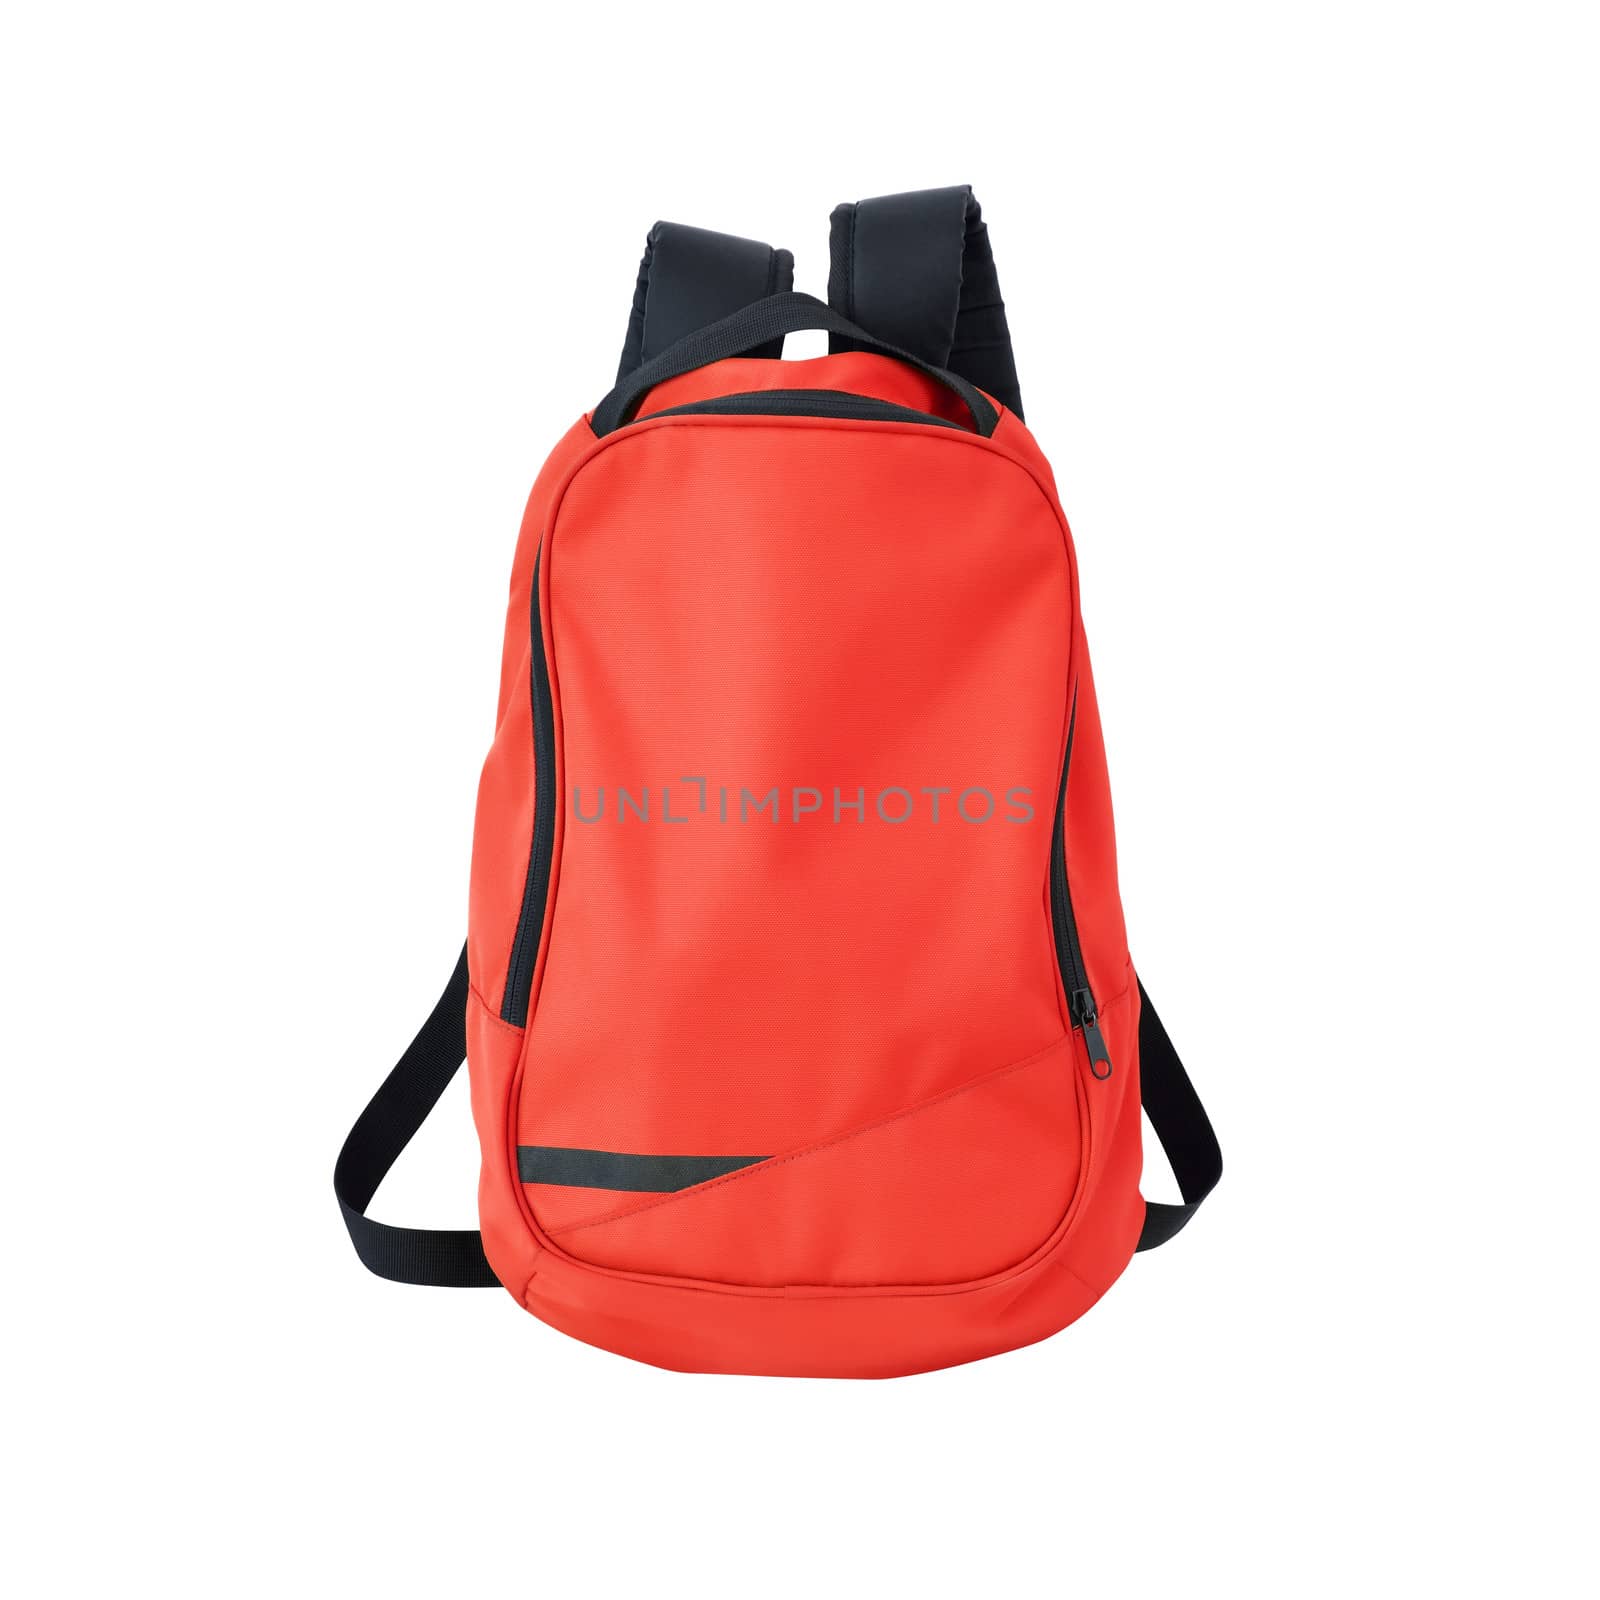 A high-resolution image of an isolated red-colored rucksack on white background. High-quality clipping path included.